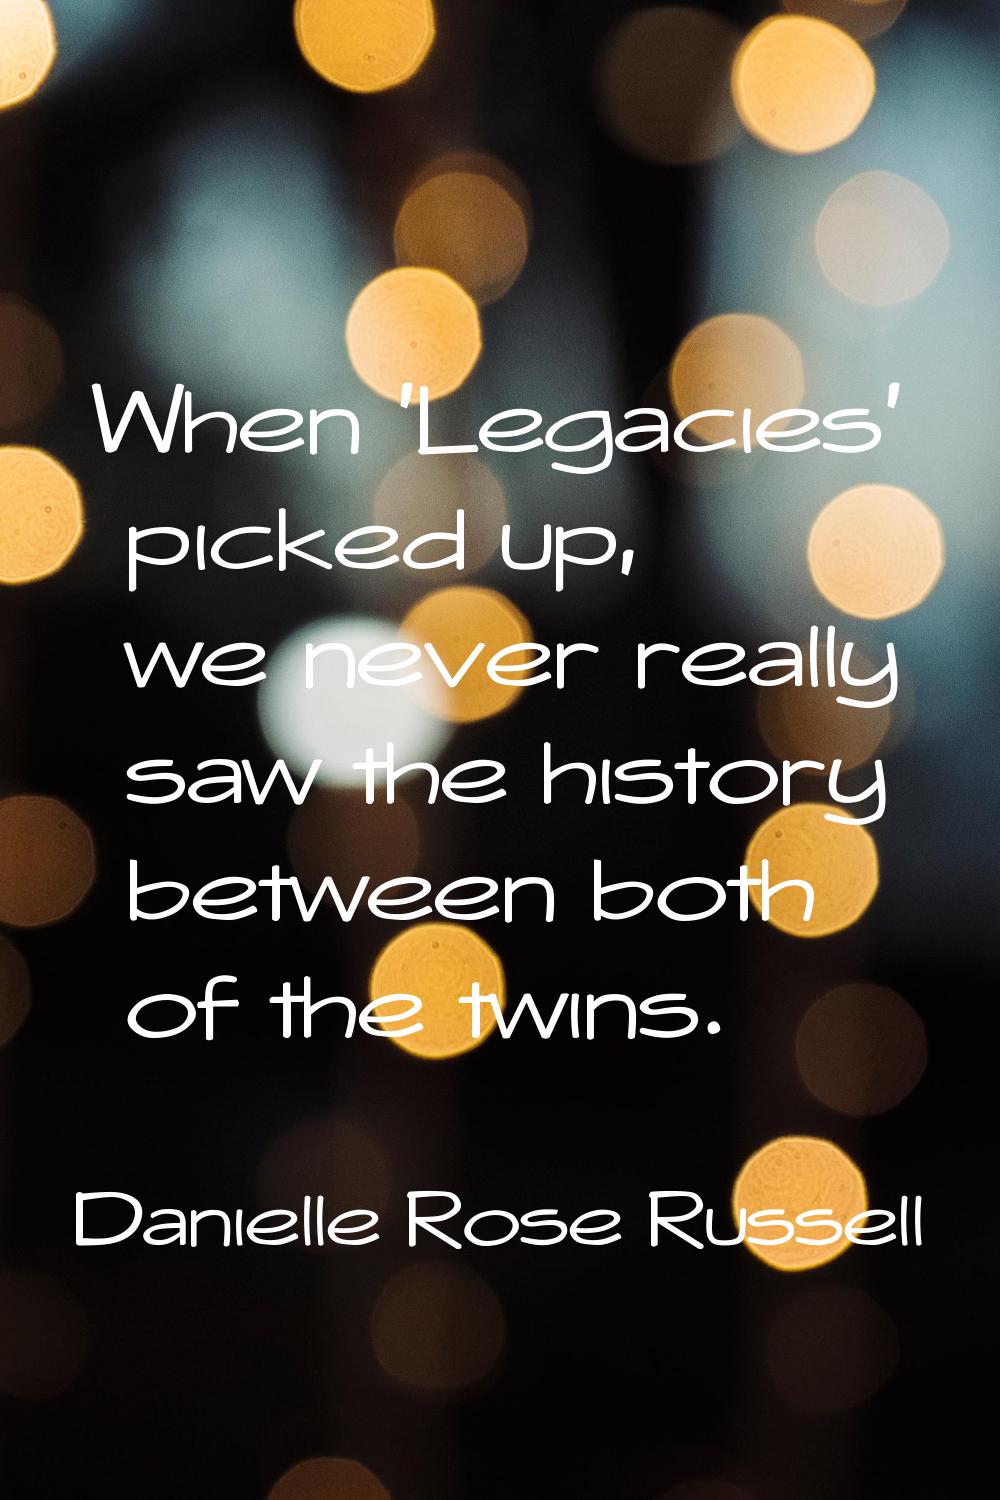 When 'Legacies' picked up, we never really saw the history between both of the twins.